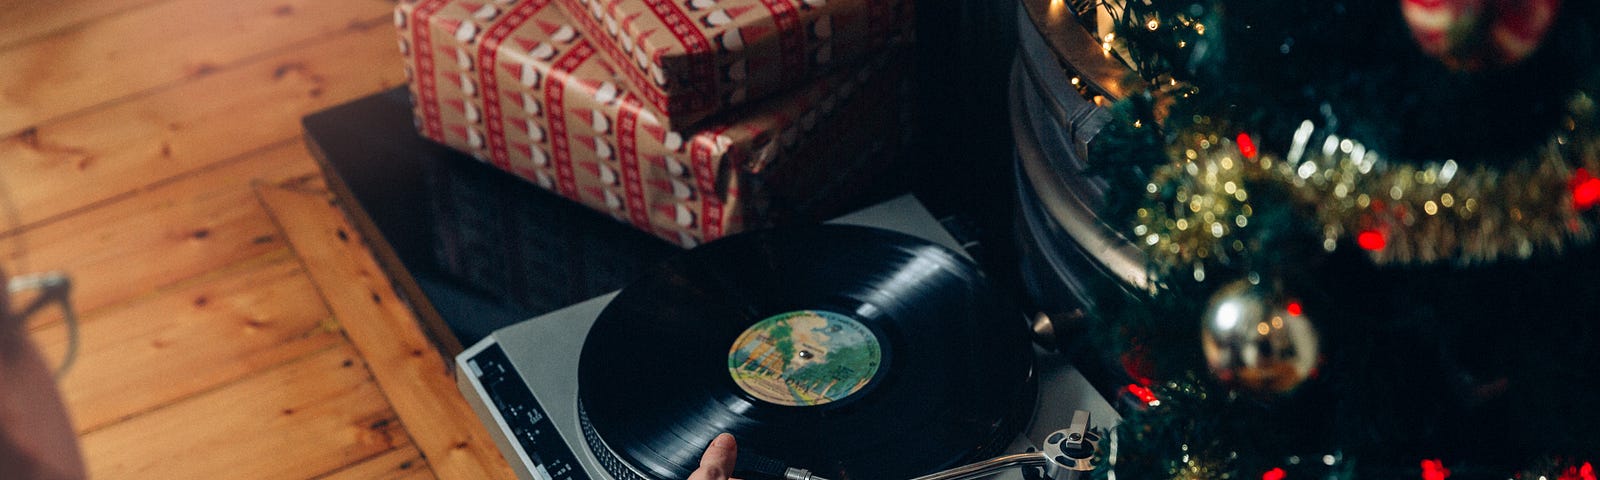 This shows a record player underneath a Christmas tree. A woman is putting a record on to play.